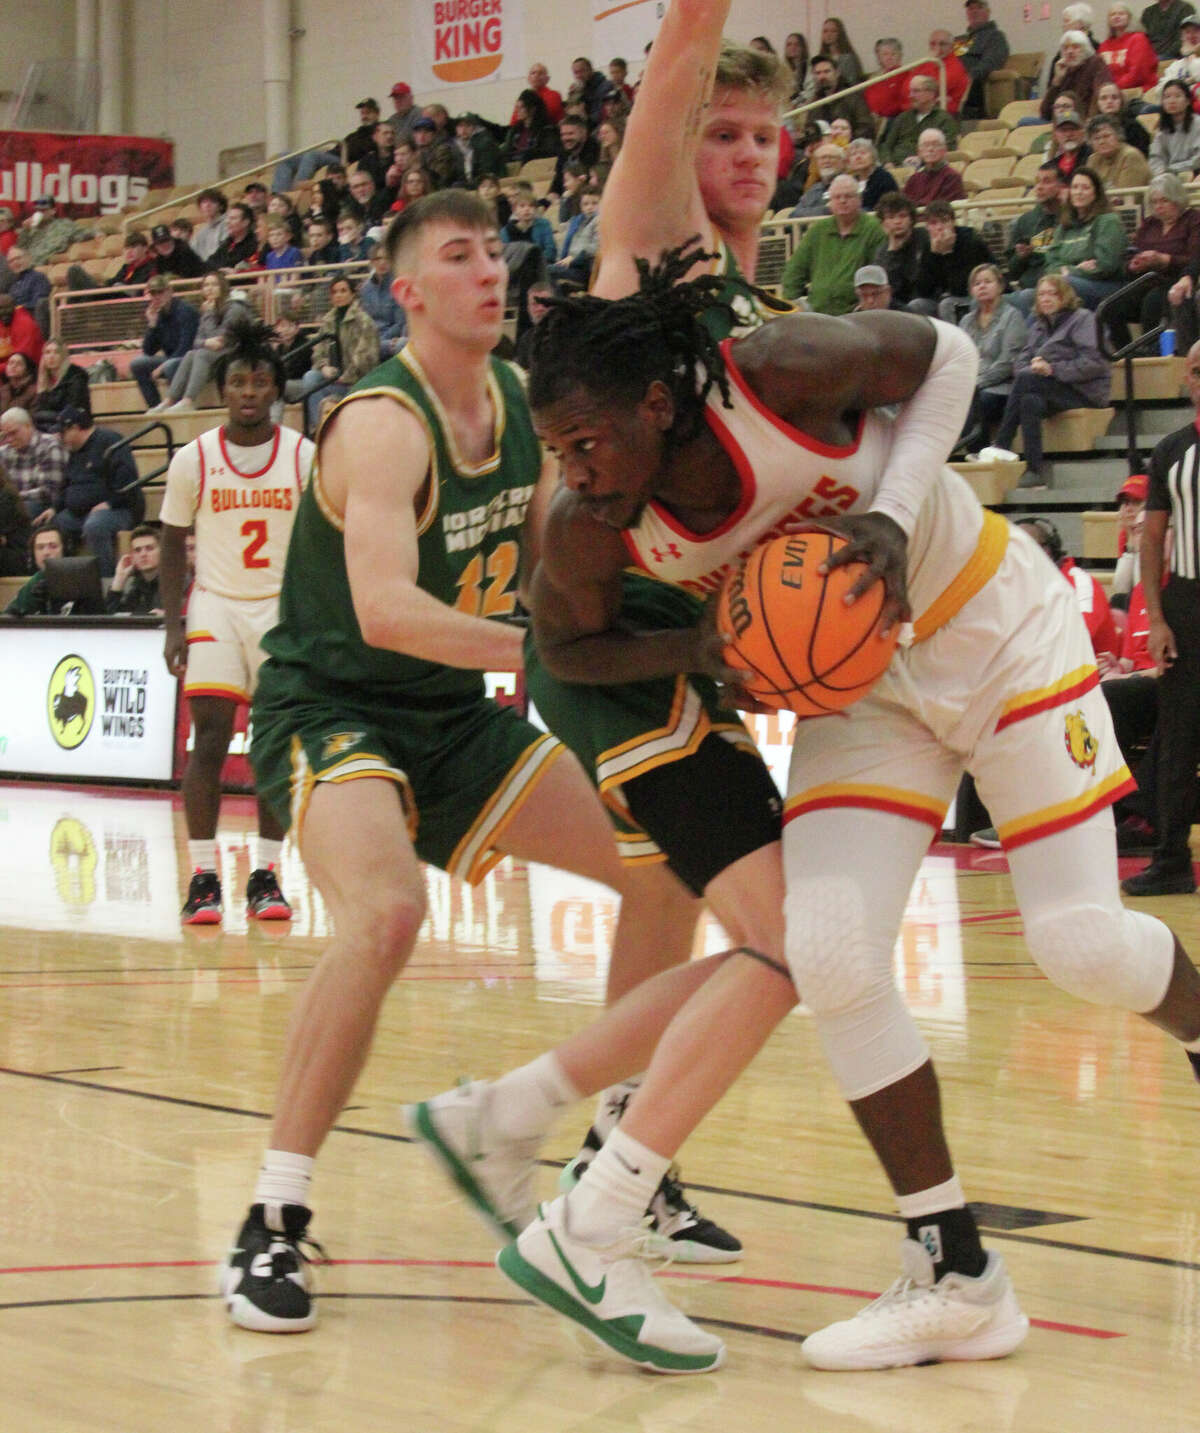 Ferris' Dolapo Olayinka drives to the basket against Northern Michigan's defense on Saturday at Wink Arena.